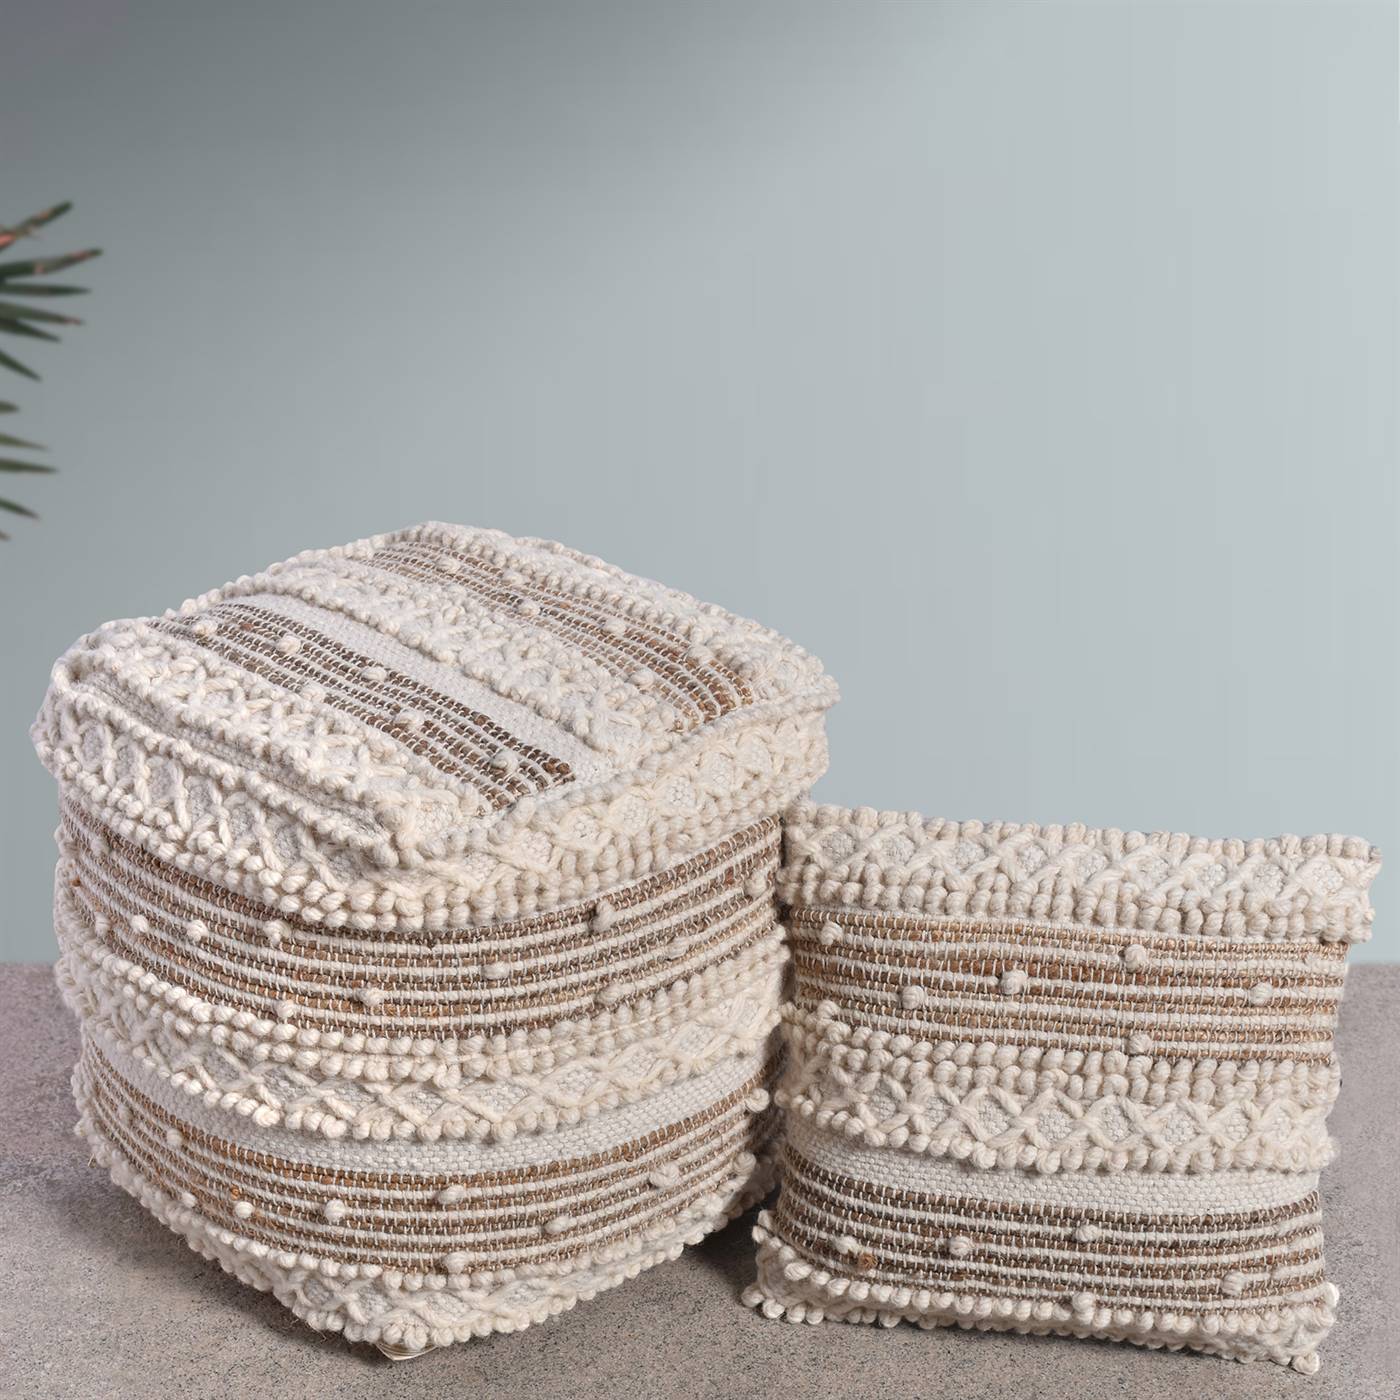 Mostar Pouf, 40x40x40 cm, Natural, Natural White, Jute, Wool, Hand Woven, Pitloom, All Loop